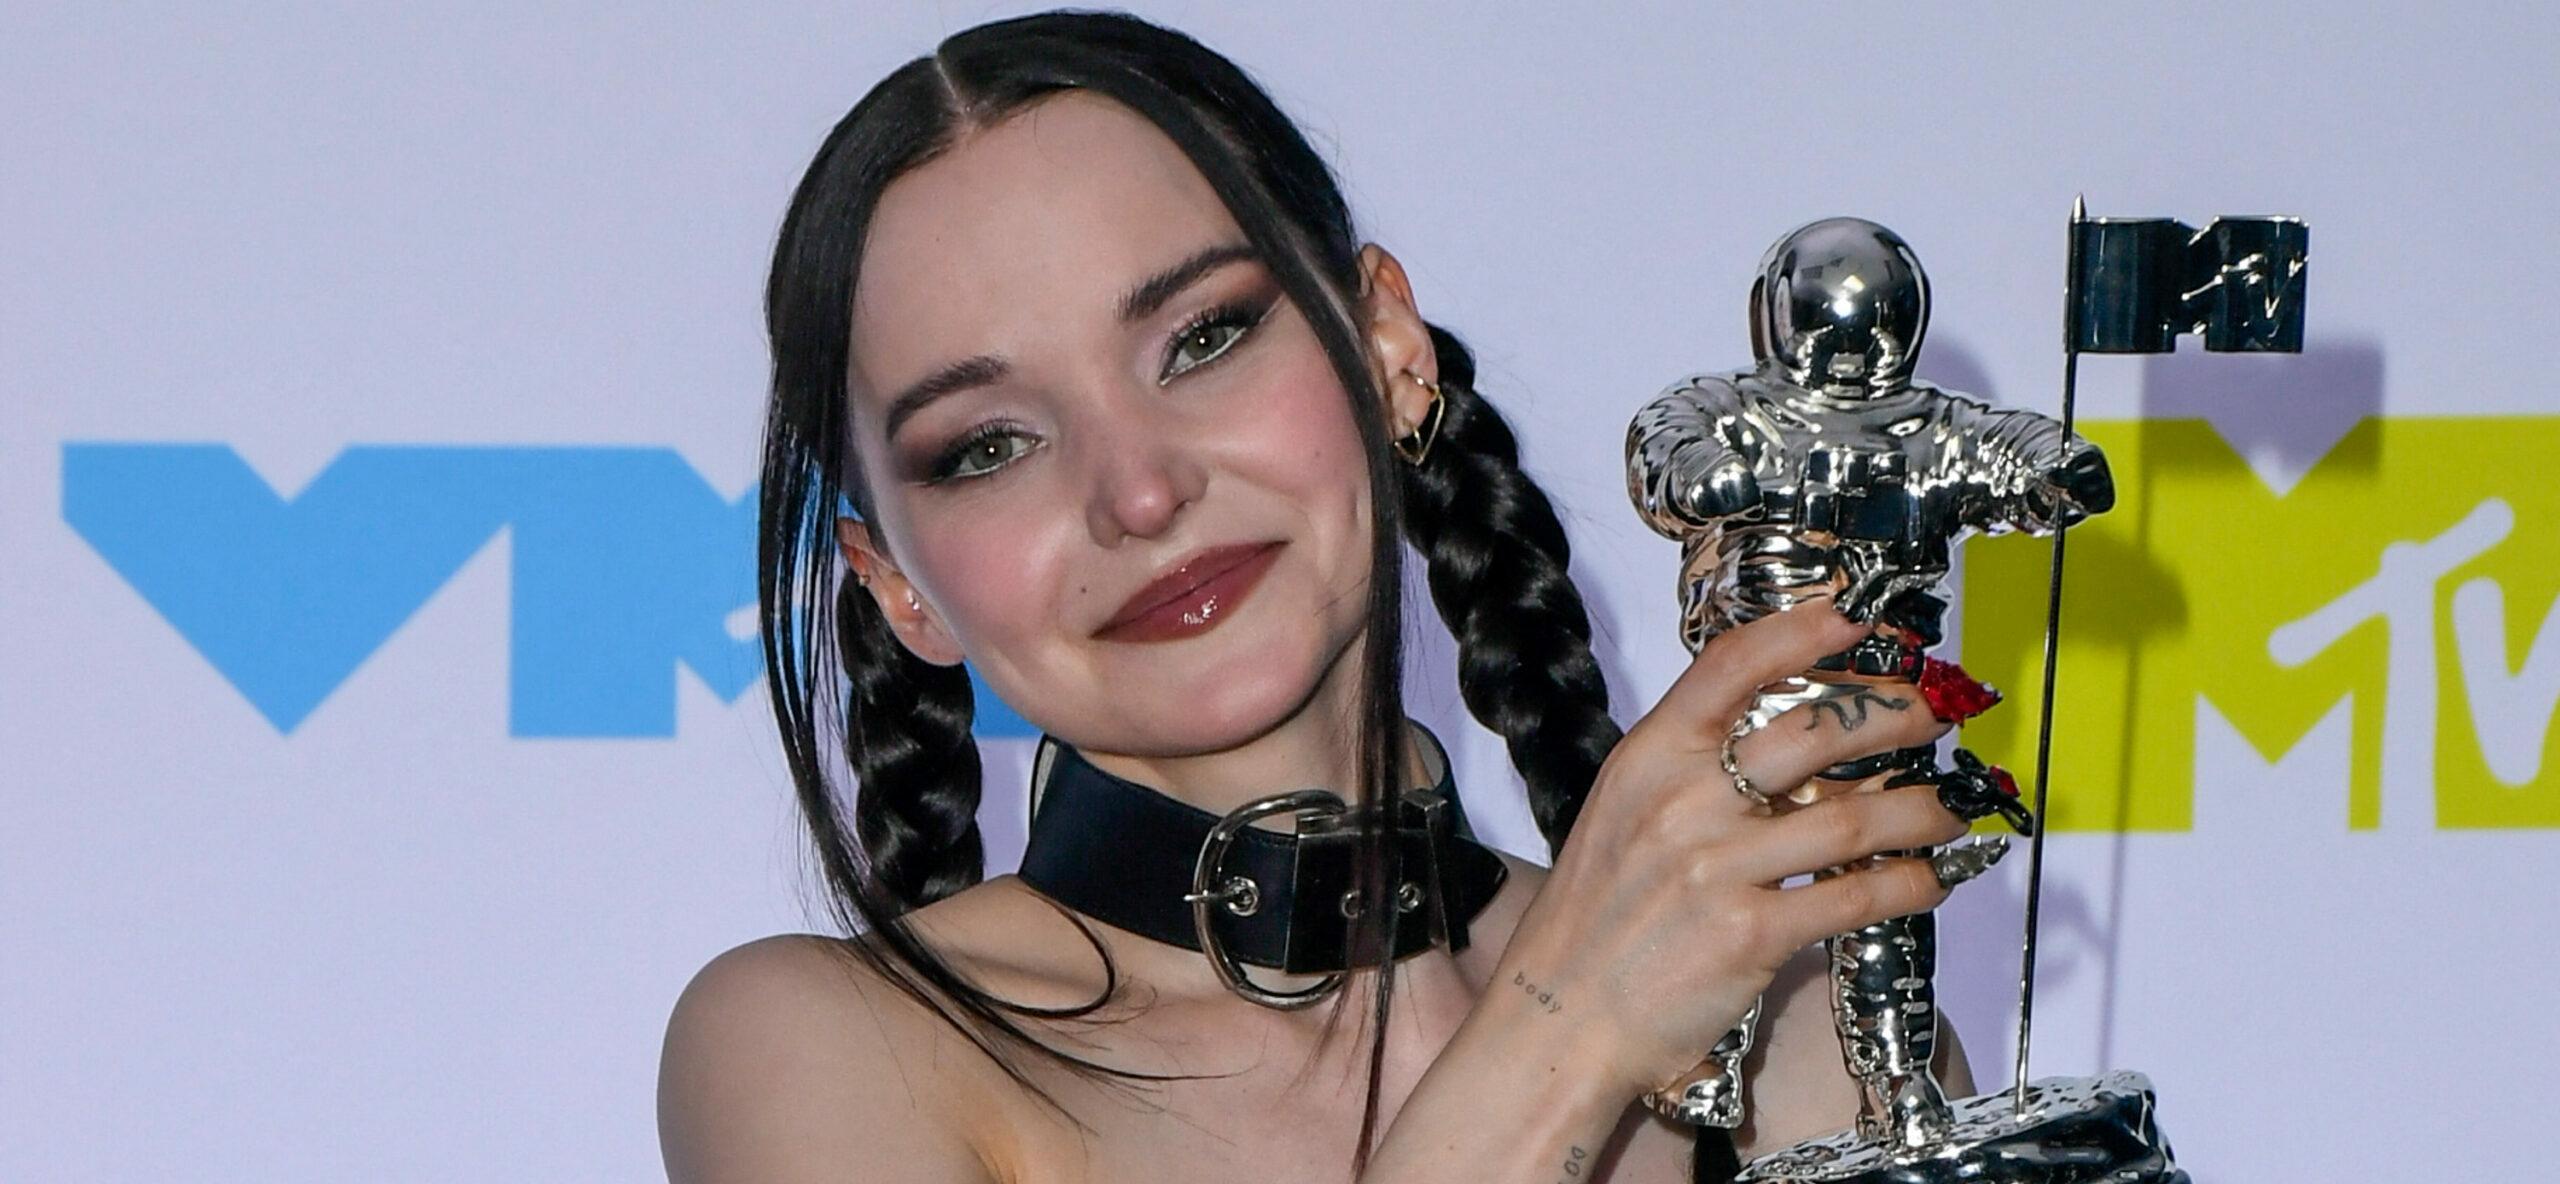 VMA winners pose in the press room at the 2022 VMA's inside the Prudential Center. 28 Aug 2022 Pictured: Dove Cameron.